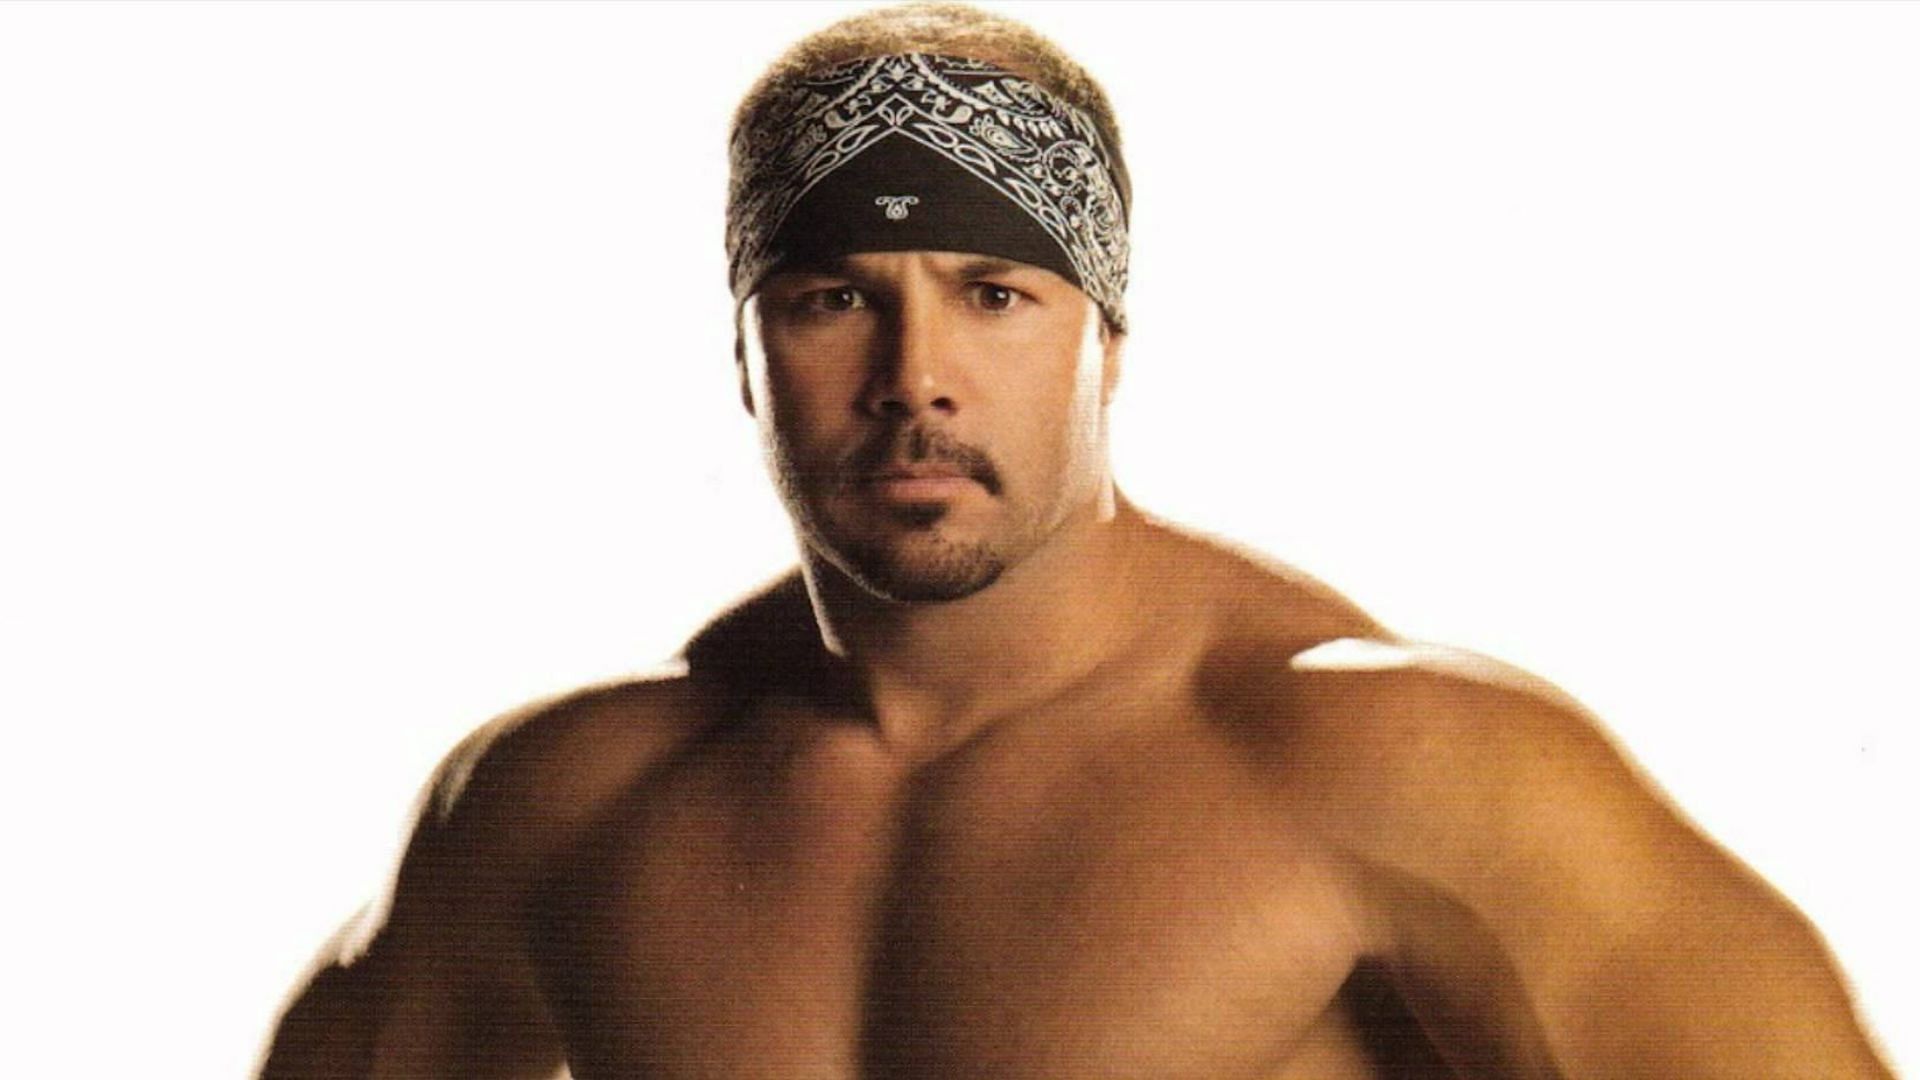 Former WCW and WWE star Chavo Guerrero